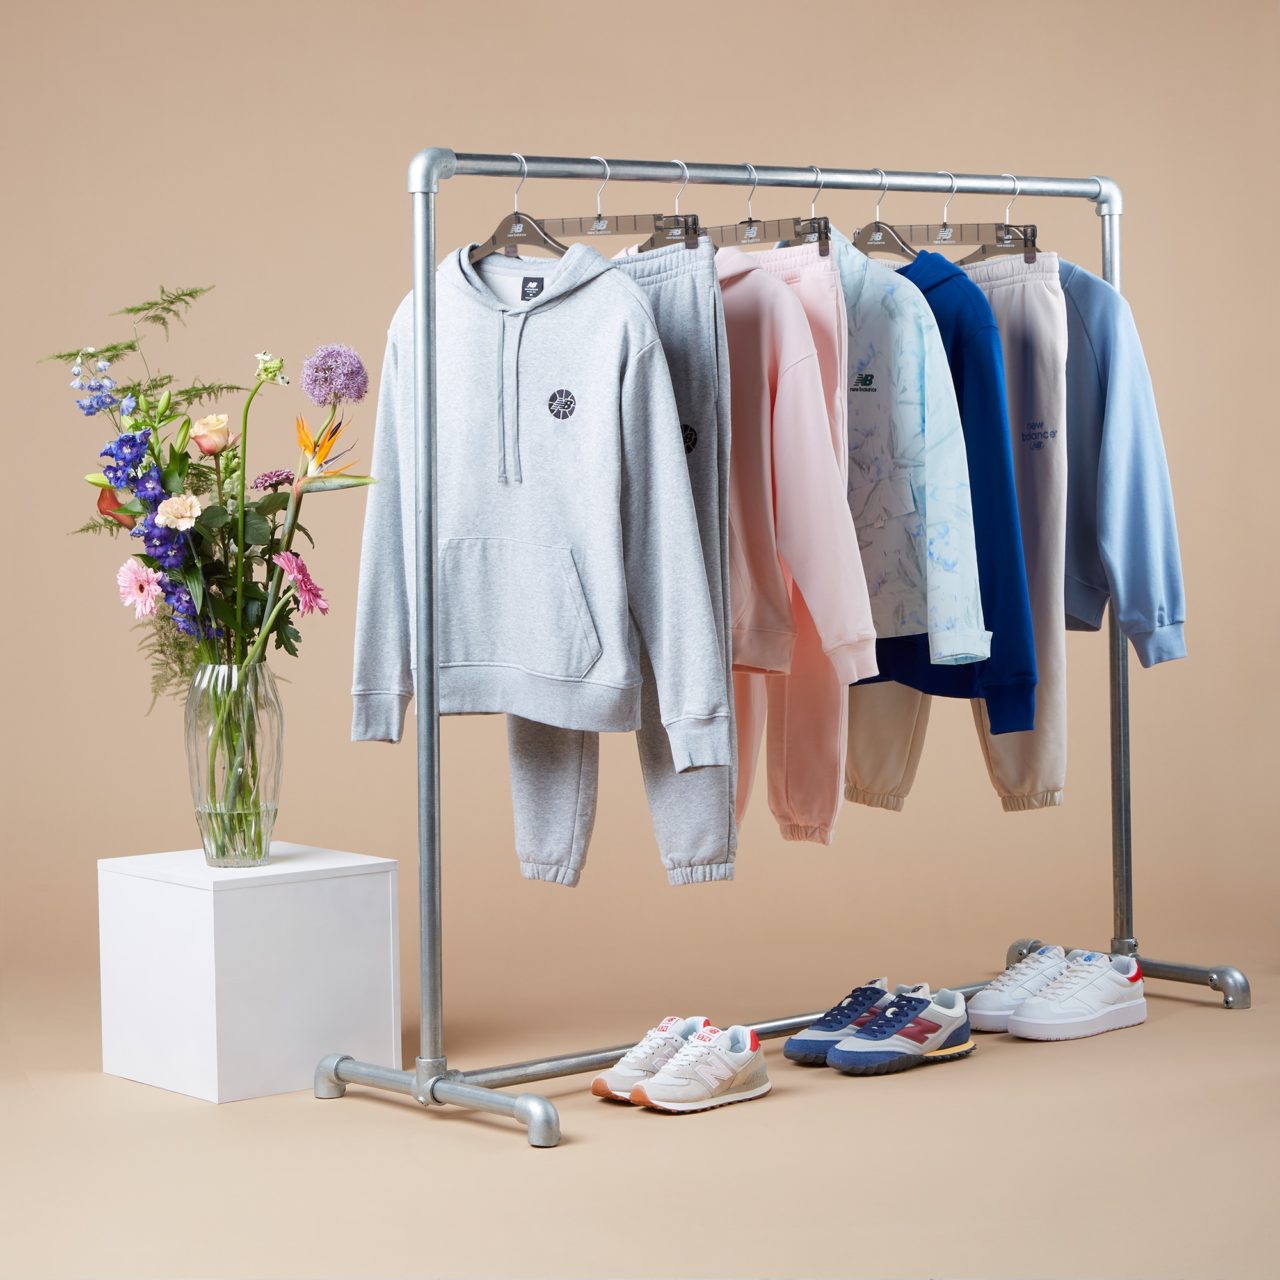 An image showcasing a clothing rack with sports clothes and three pairs of sneakers. Adjacent to the rack, there is a white cube with a vase containing a flower. Creative promotional image captured by I Heart Studios.